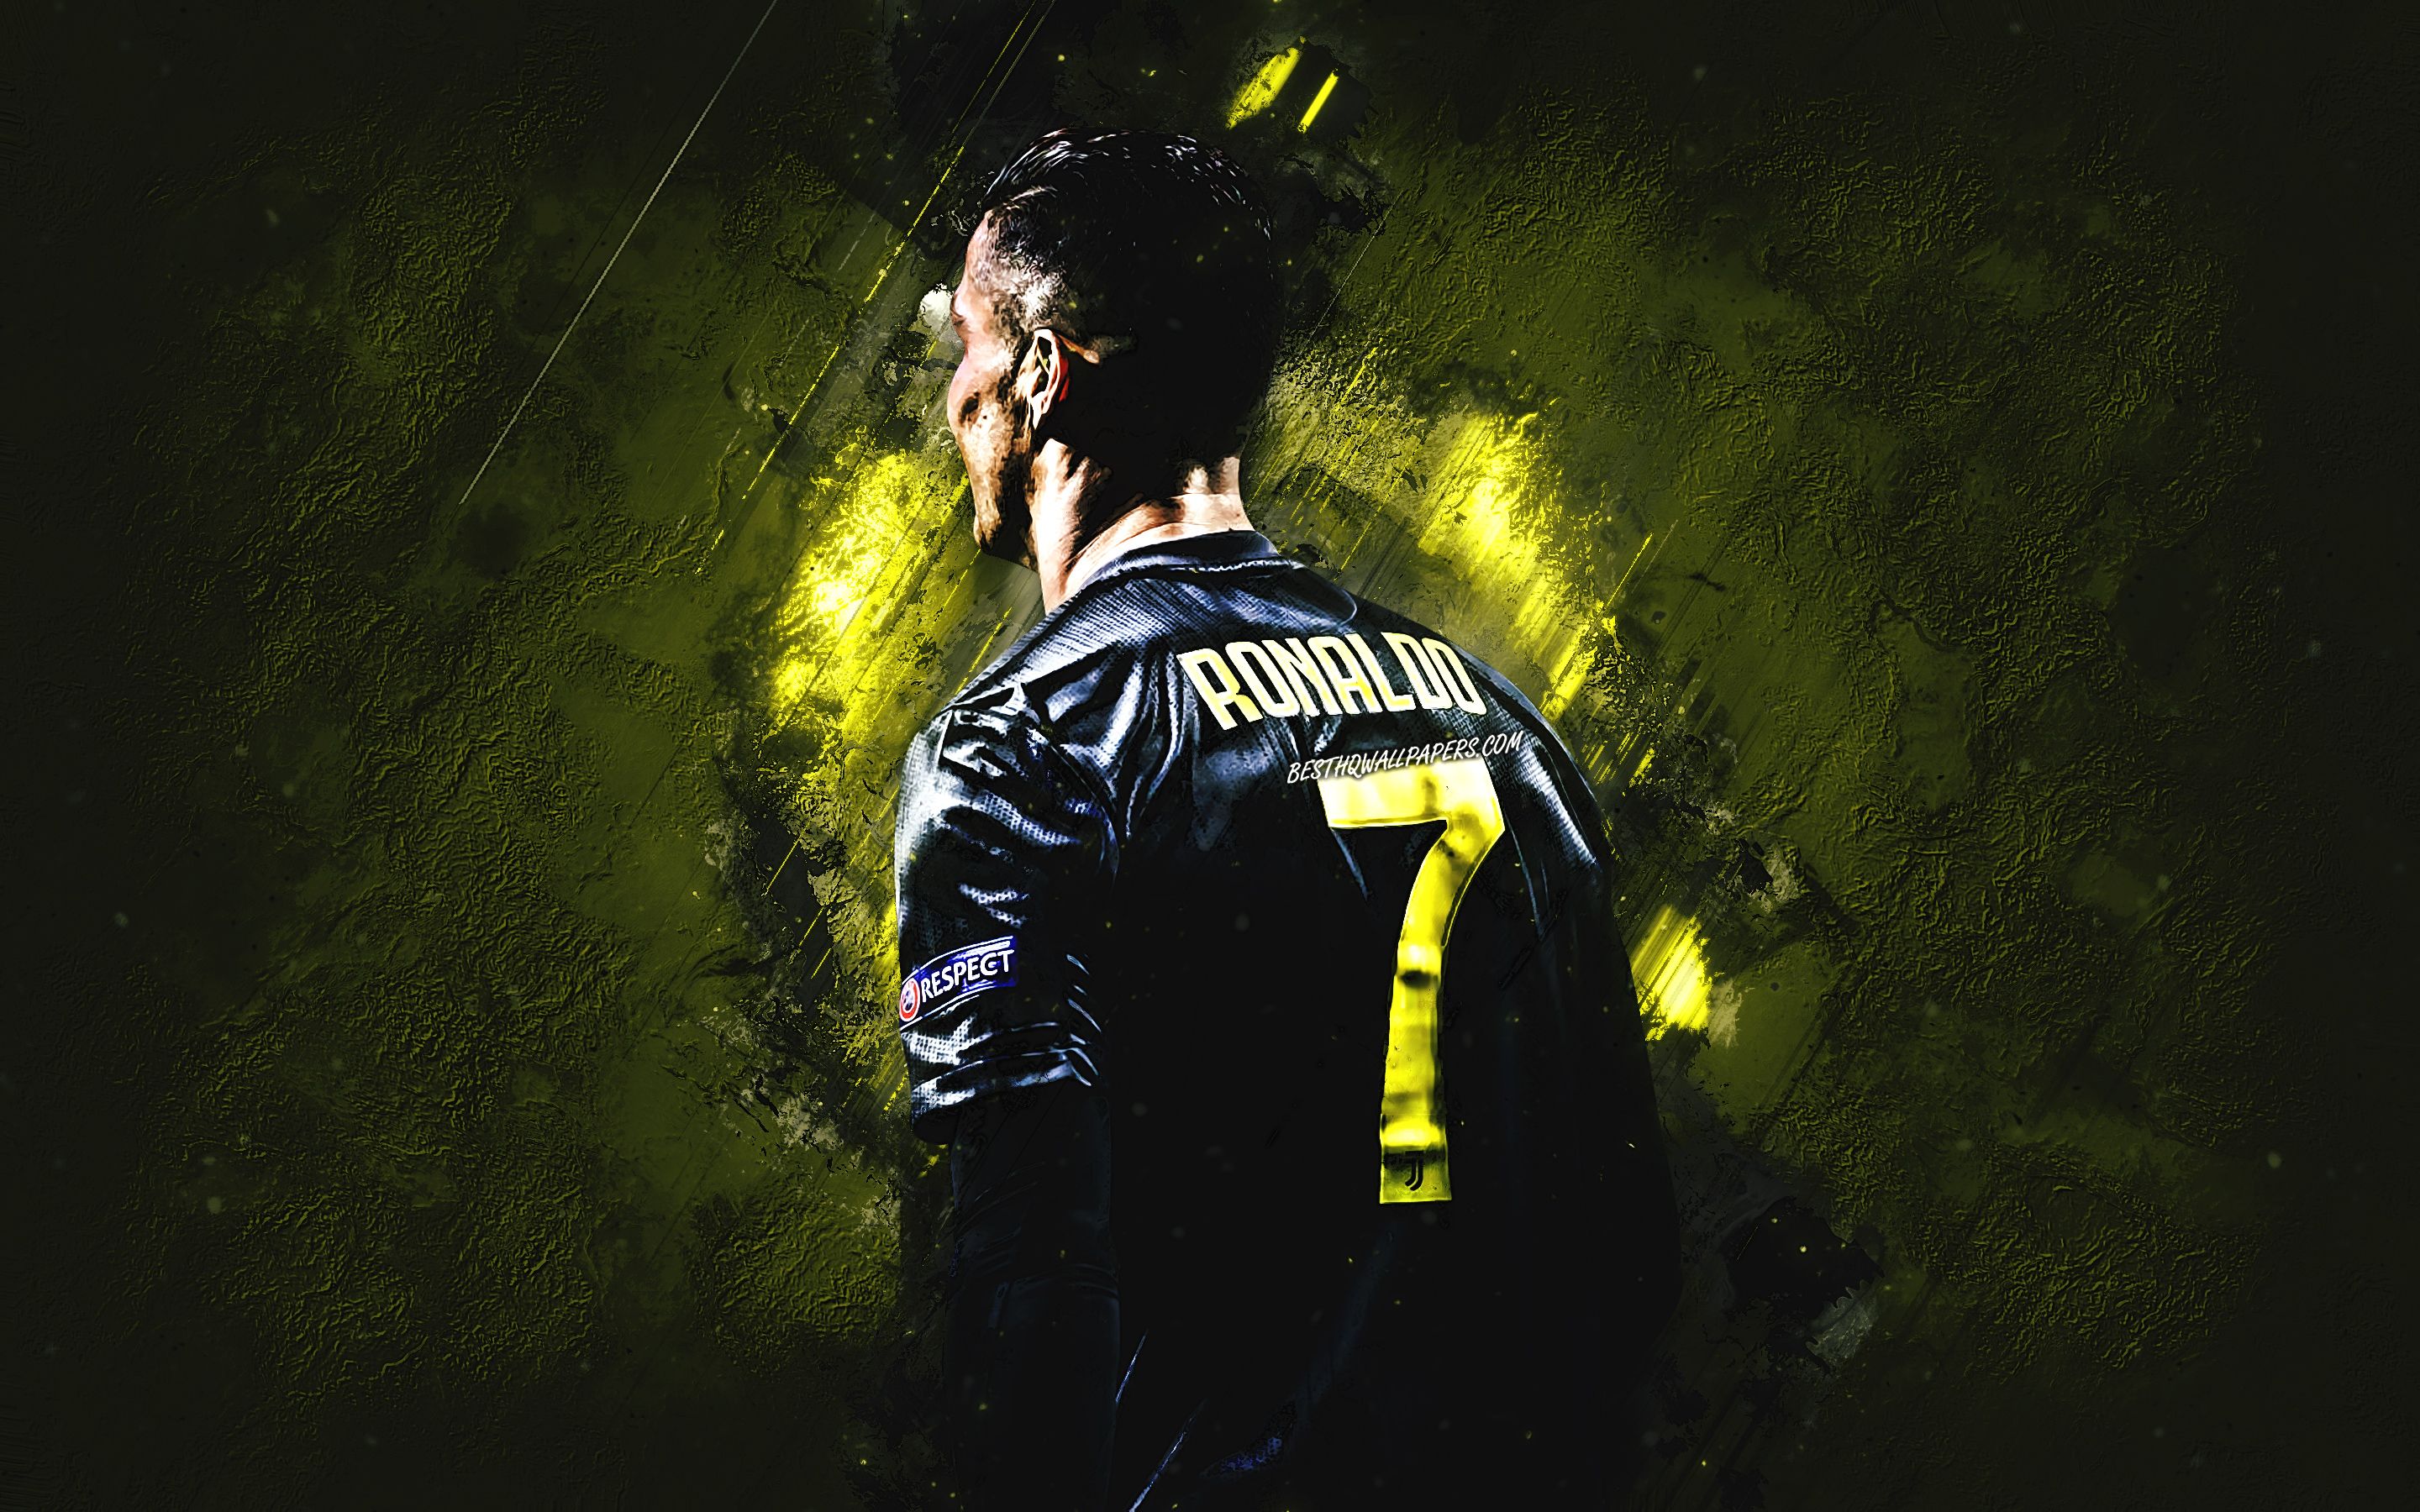 Download wallpaper Cristiano Ronaldo, Portuguese soccer player, Juventus FC, black uniform, CR football star, Serie A, Italy, football, yellow stone background for desktop with resolution 2880x1800. High Quality HD picture wallpaper